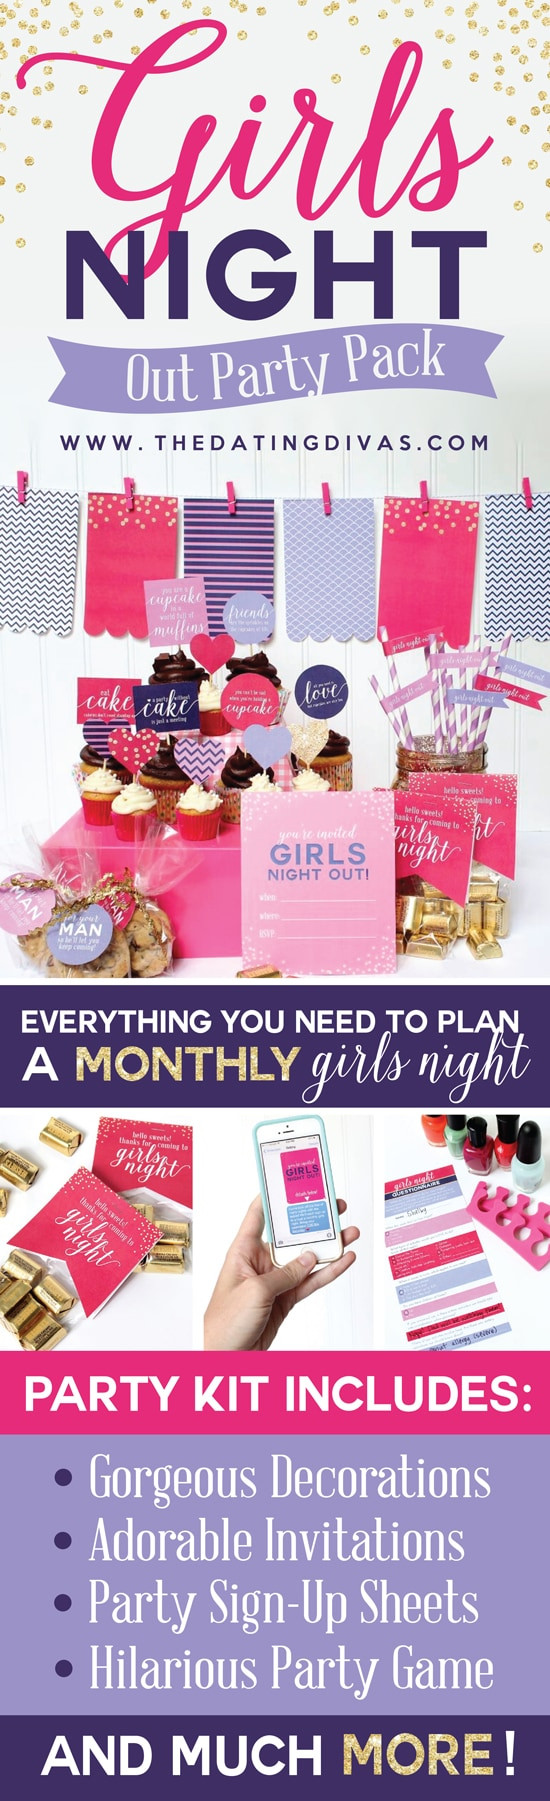 Girls Night In Ideas For Adults
 Girls Night Out Ideas